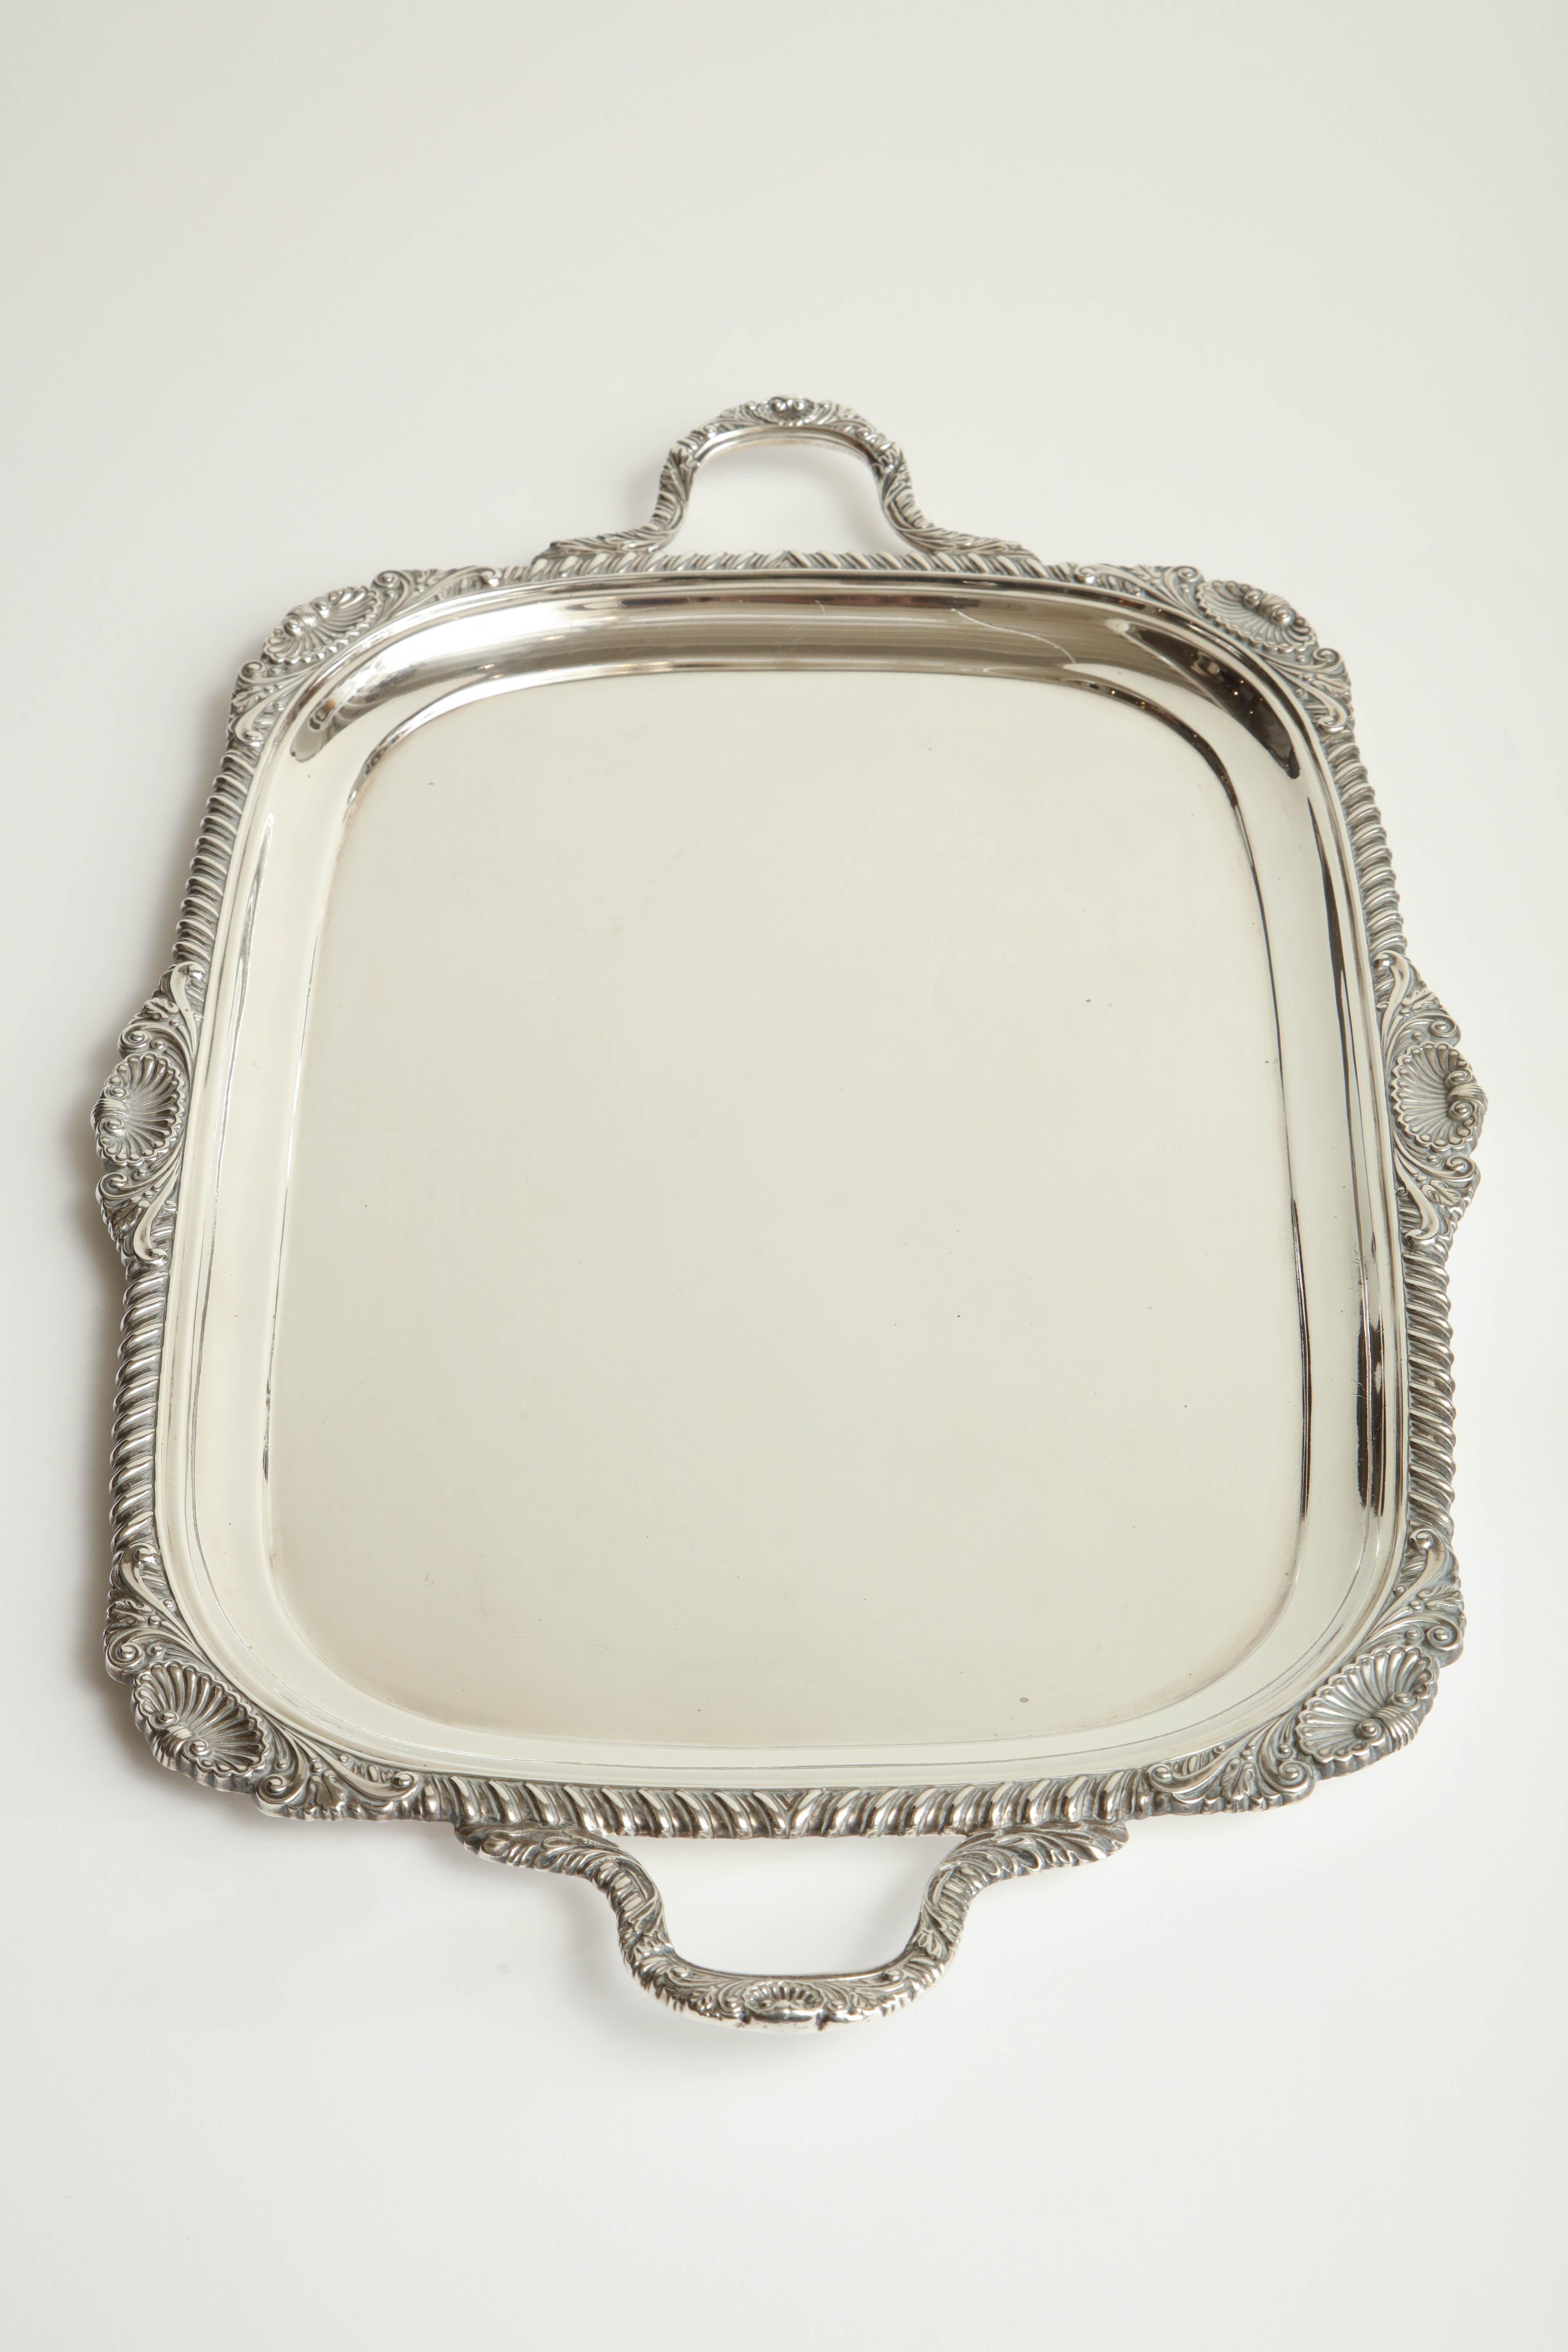 19th Century English, Hawksworth & Eyre Sterling Silver Tray 74oz For Sale 4